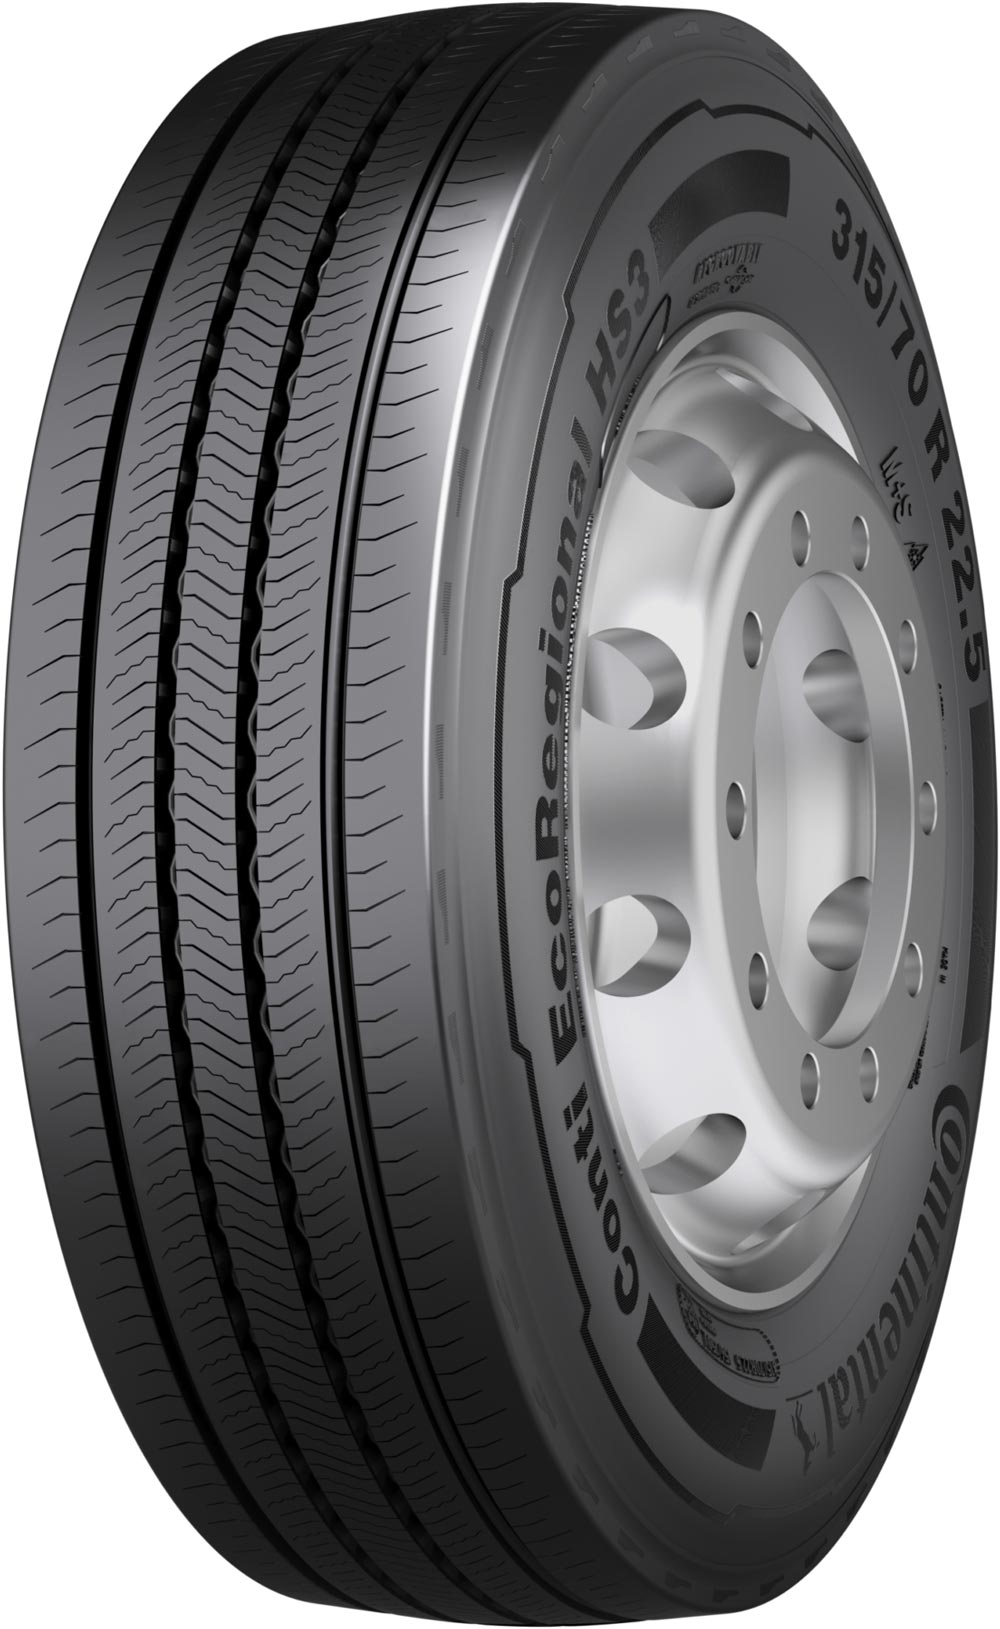 product_type-heavy_tires CONTINENTAL ContiEcoRegional HS3 TL 385/65 R22.5 K